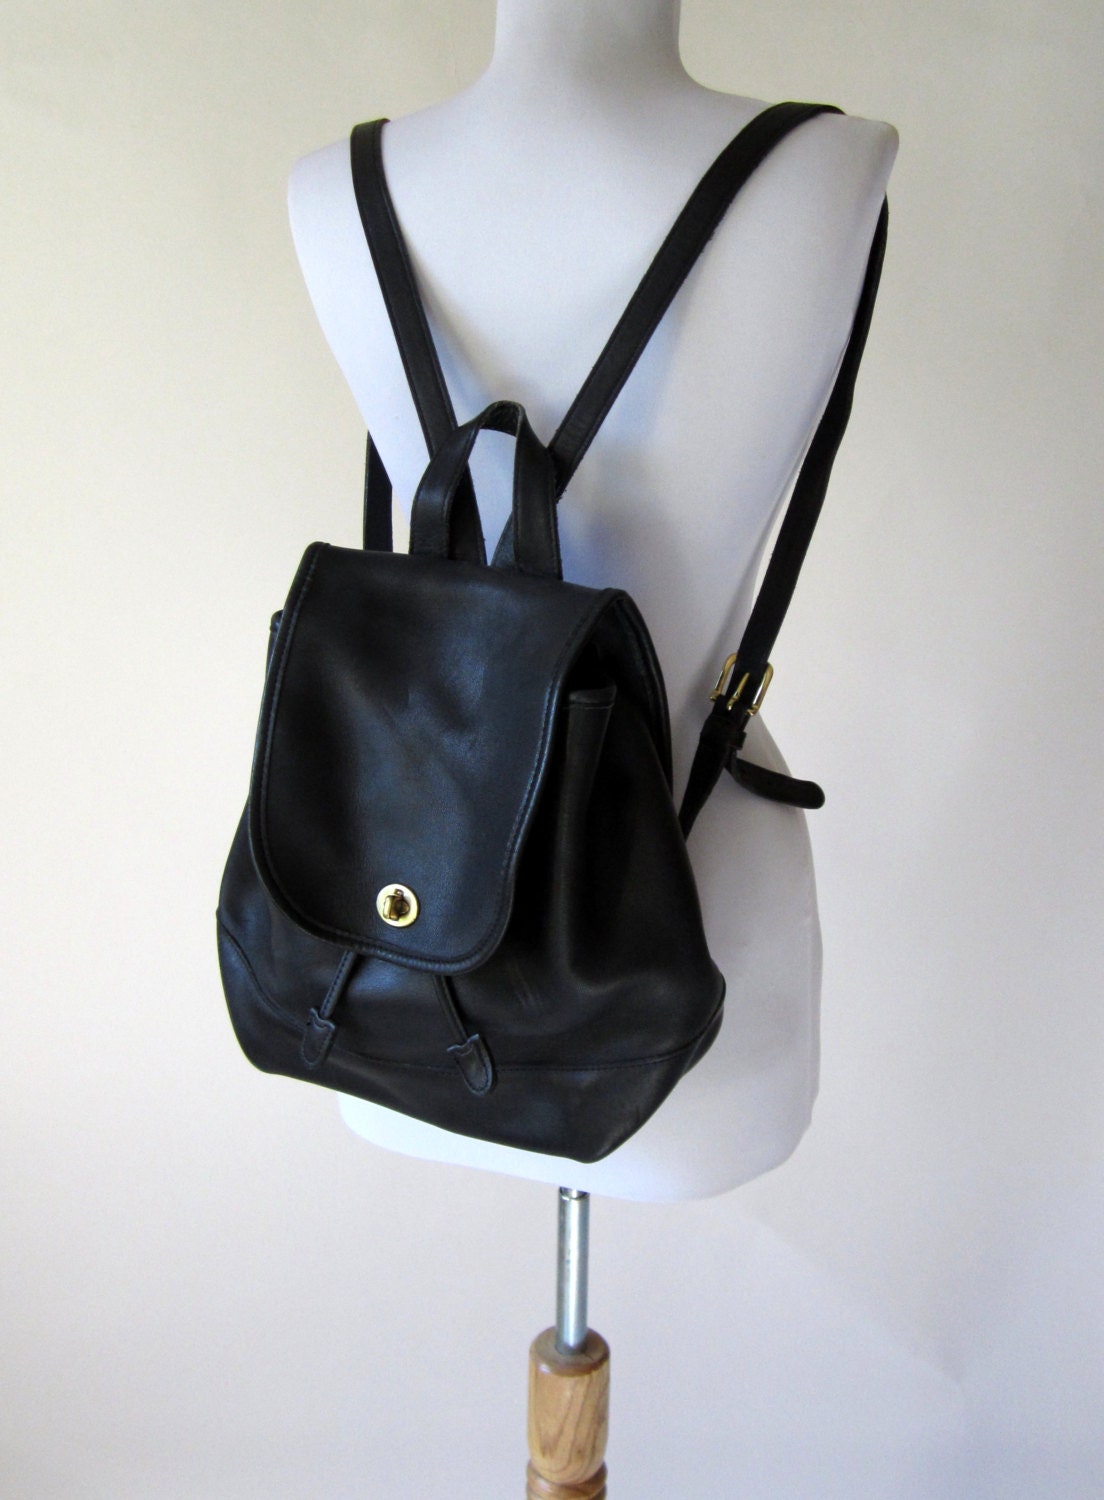 Vintage Coach Black Leather Backpack Purse Bag by FabVintage